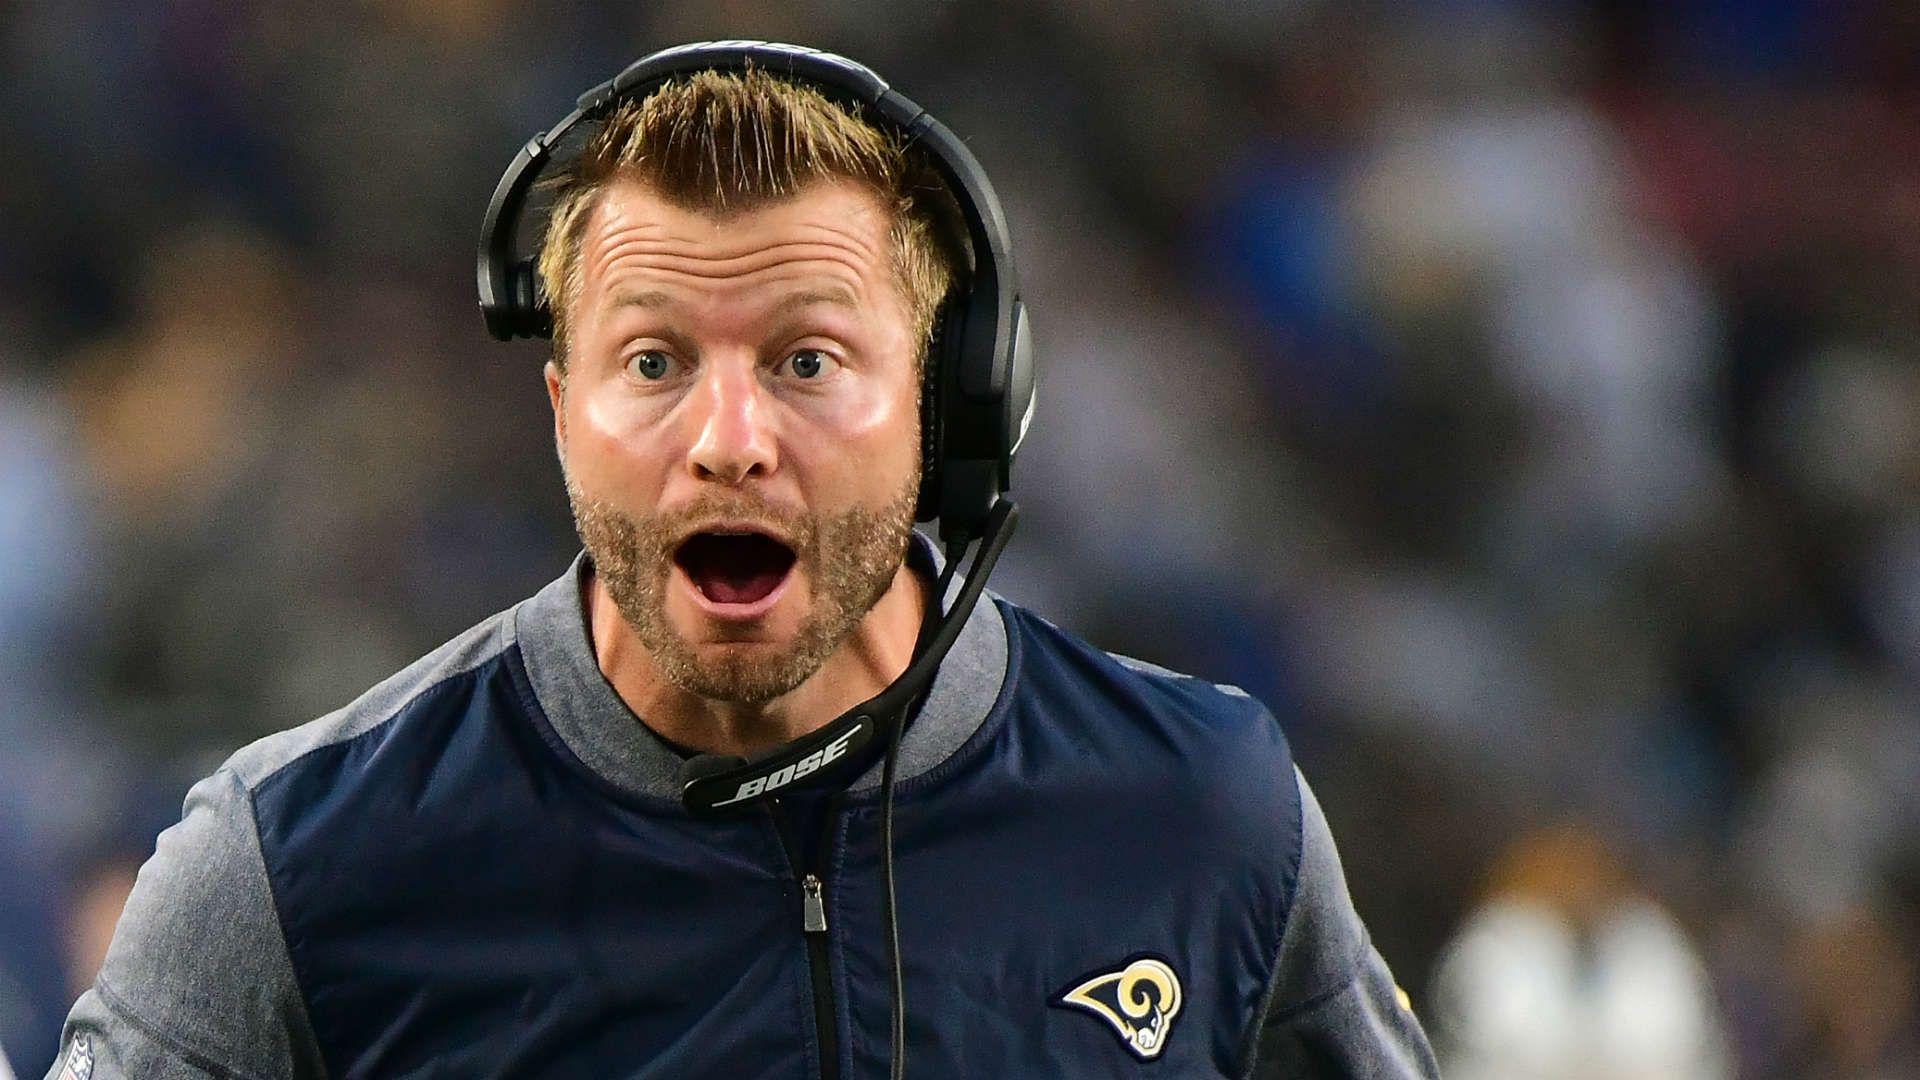 Rams' Sean McVay, named 2017 NFL Coach of the Year